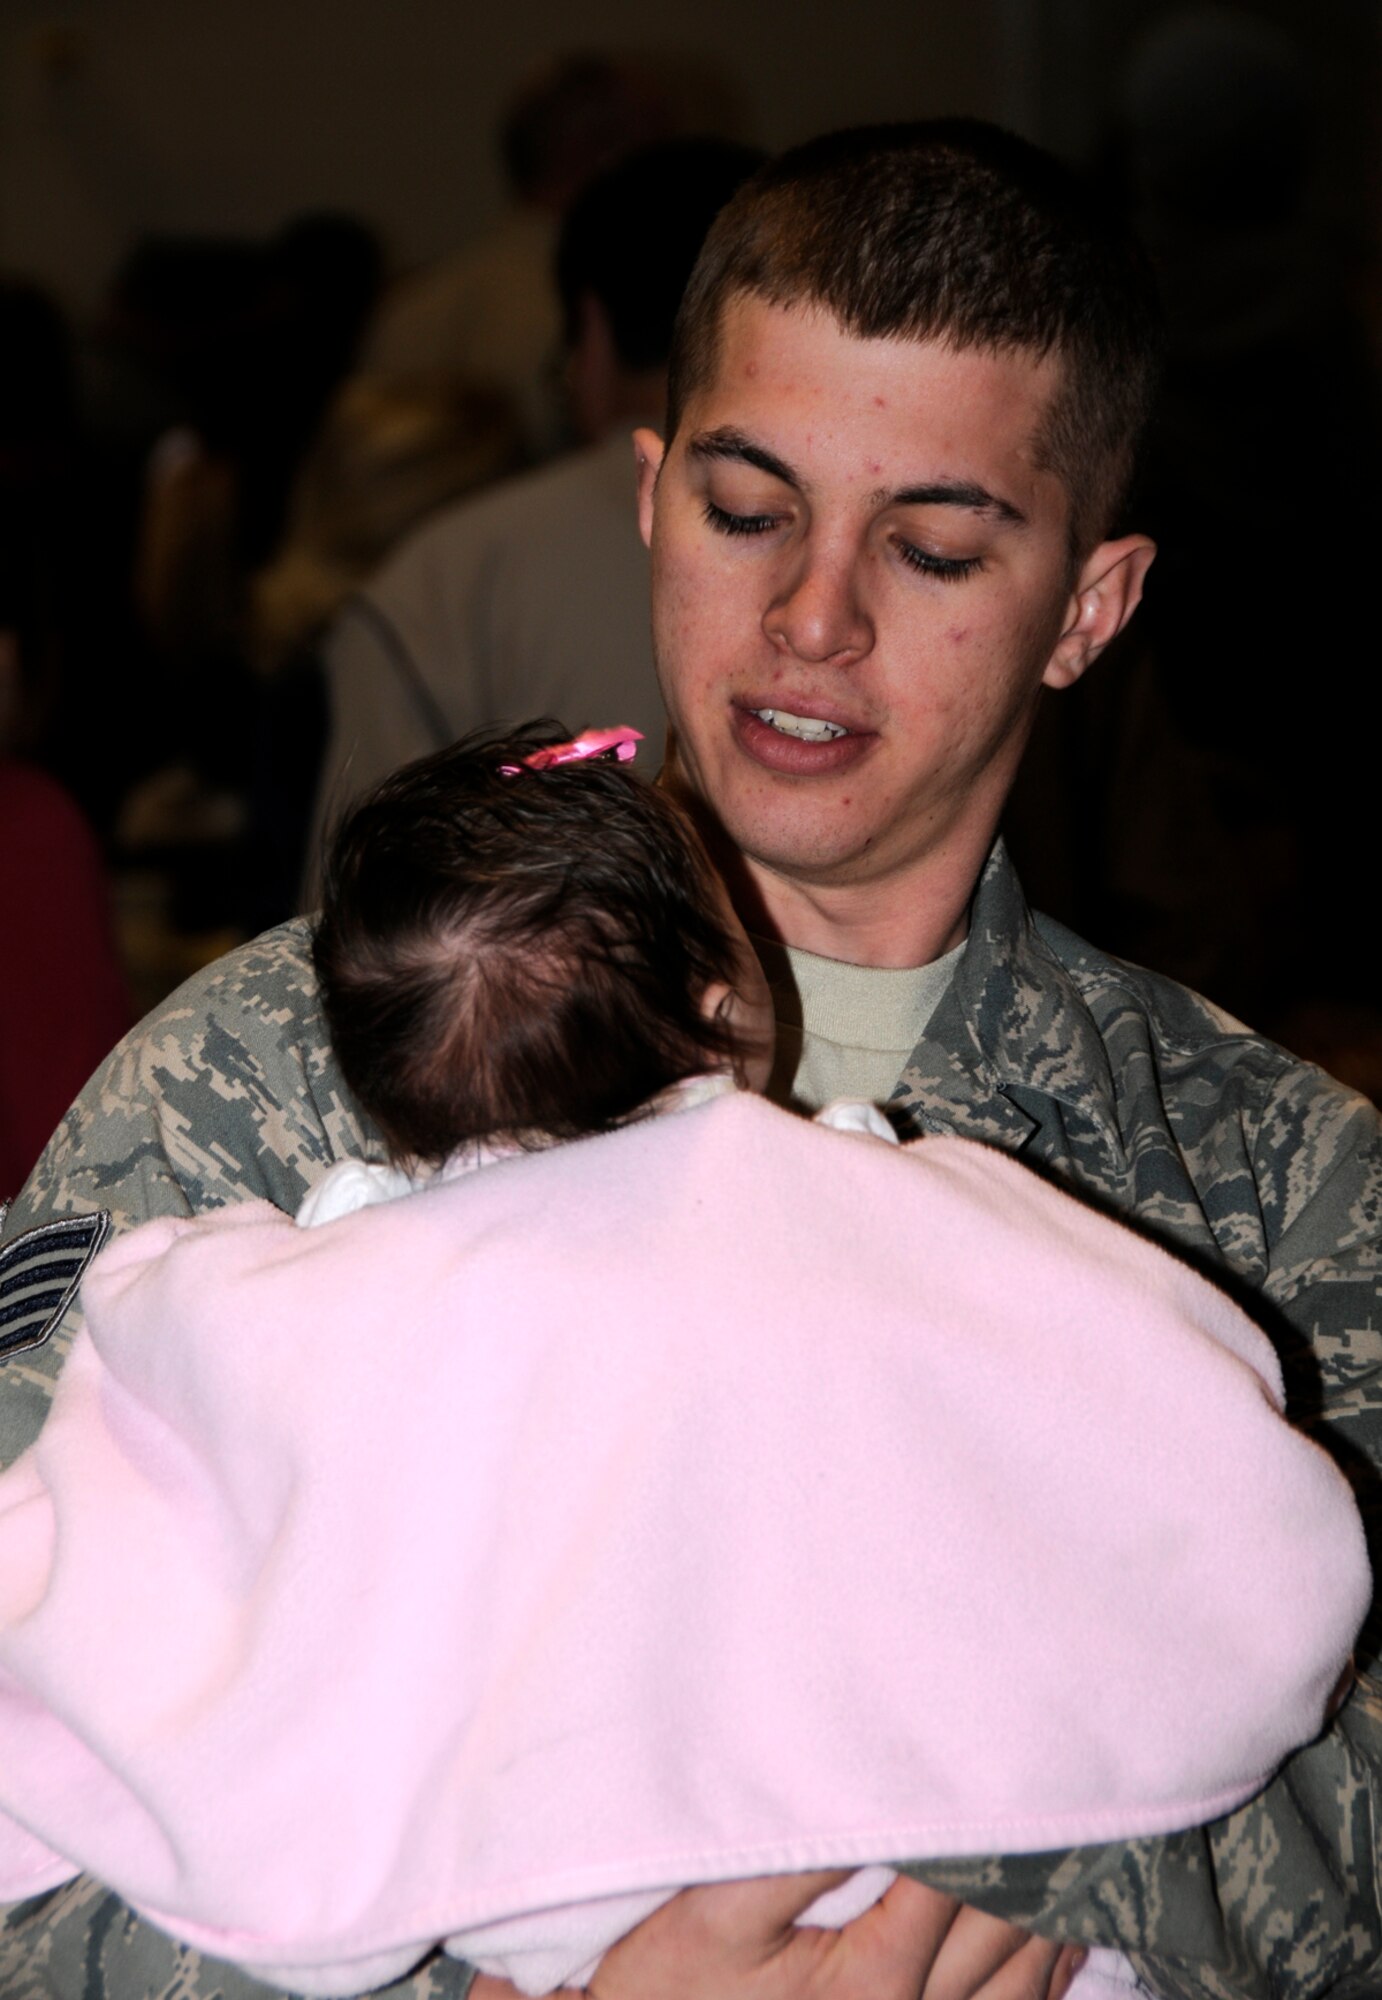 A member of the 188th Fighter Wing enjoys time with his family prior to departing for an Aerospace Expeditionary Forces deployment March 8, 2010, at Fort Smith, Ark. The 188th will be deployed to Kandahar, Afghanistan, for more than two months. The 188th will be attached to the 451st Expeditionary Wing while at Kandahar Airfield. This marks the 188th's first combat deployment with the A-10 Thunderbolt II "Warthog." (U.S. Air Force photo by Tech Sgt. Stephen M. Hornsey/188th Fighter Wing Public Affairs)
	
